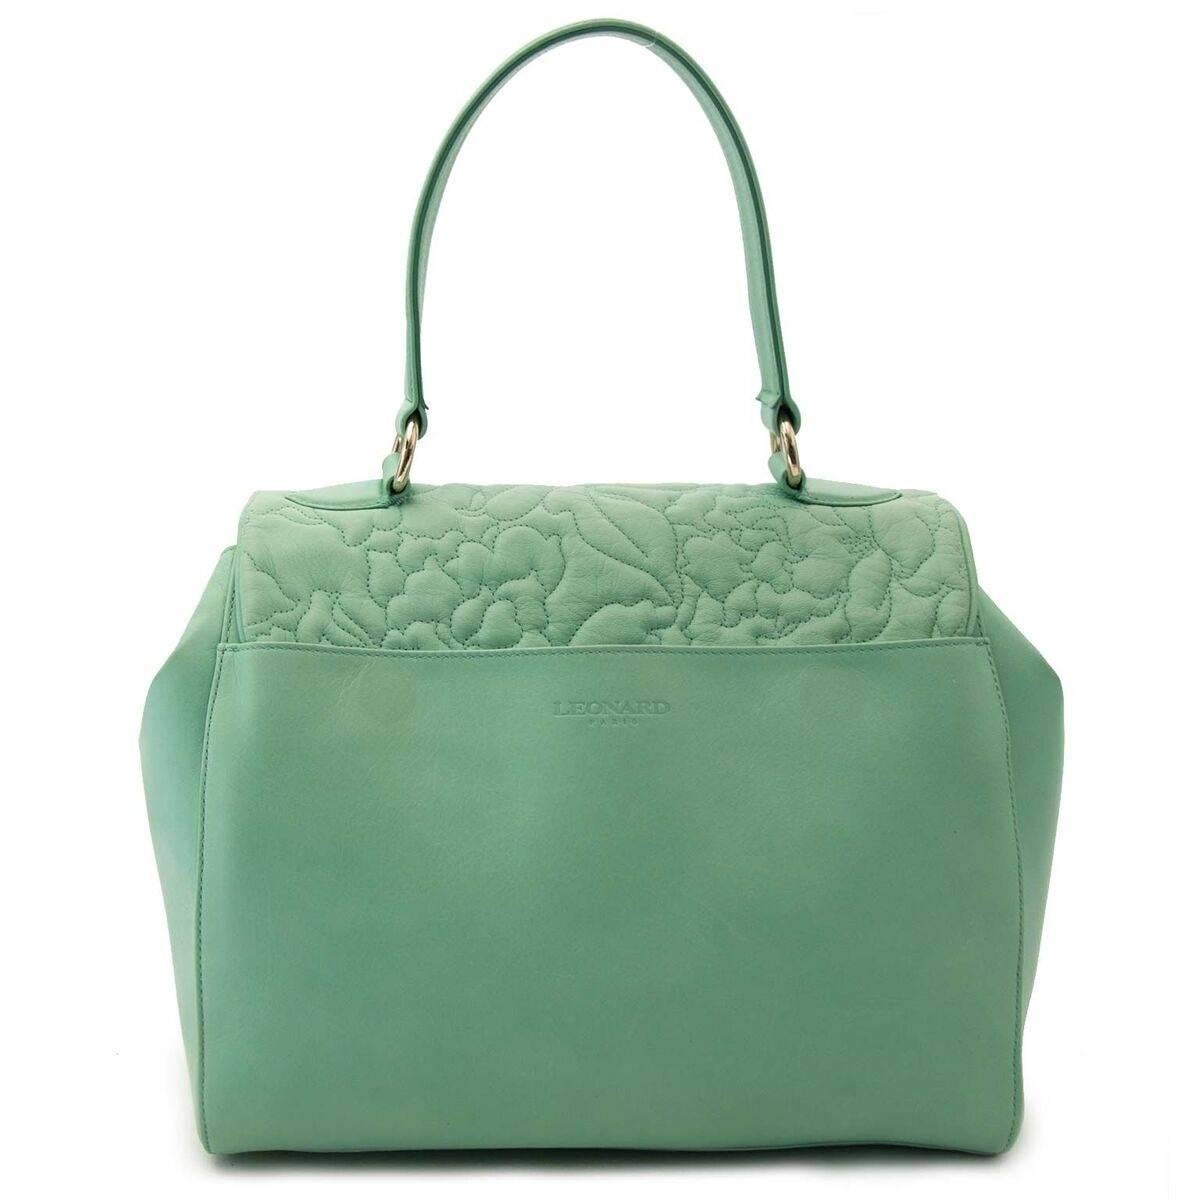 Excellent condition

Leonard Mint Green Top Handle Handbag

Pastel colors can be worn in winter aswell as in summer. So this bag is an all year around purse.
The font flap has a sowing pattern of flowers.
Put all your daily essentiels in this